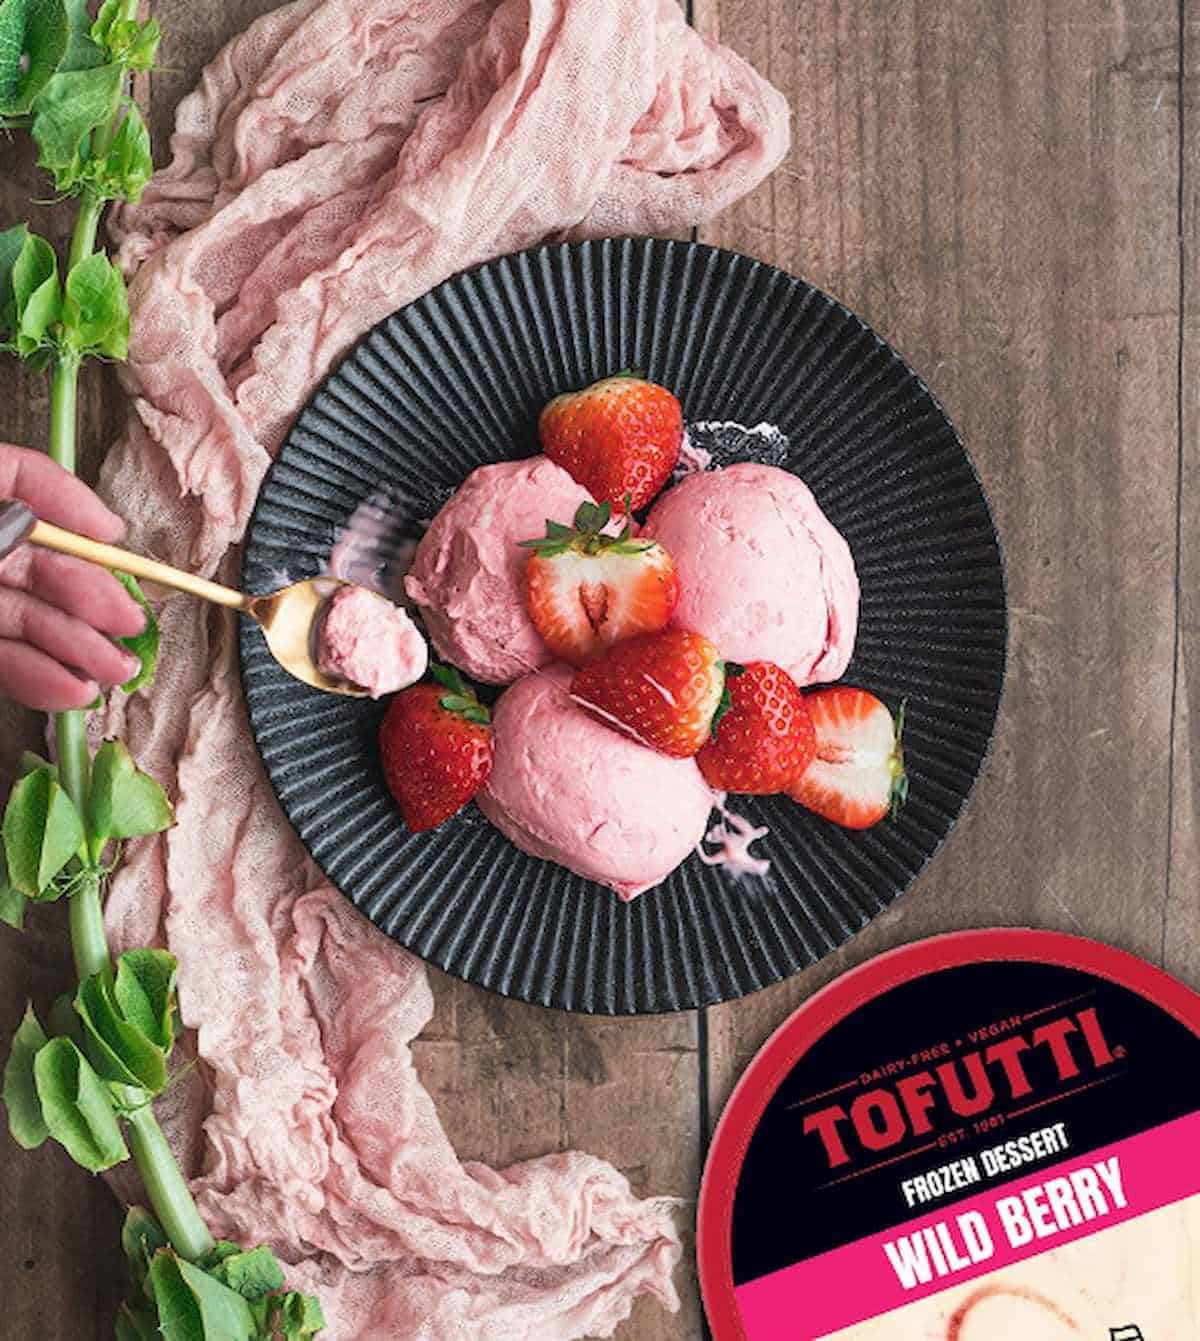 Hand with spoon scooping into a bowl of Tofutti wild berry frozen dessert.